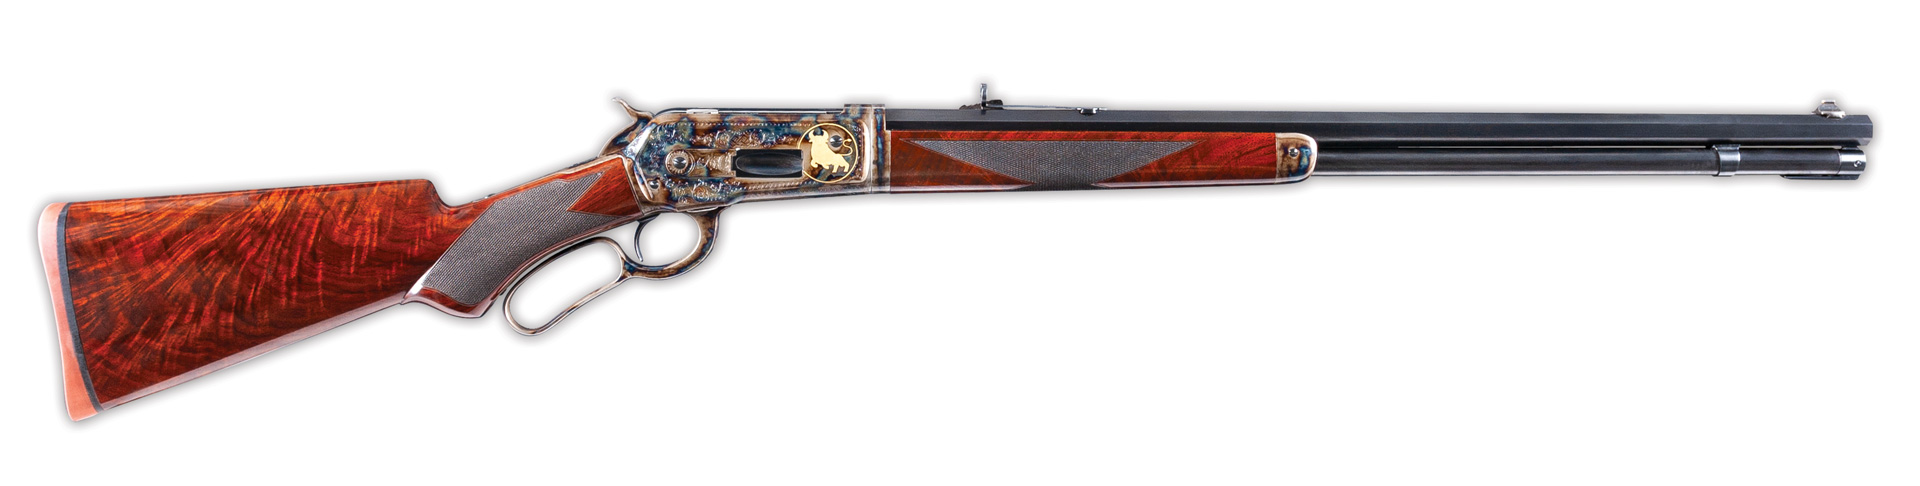 Photo of Doug Turnbull’s personal Winchester Model 1886 from 1888, as restored and converted to .475 Turnbull in 2007